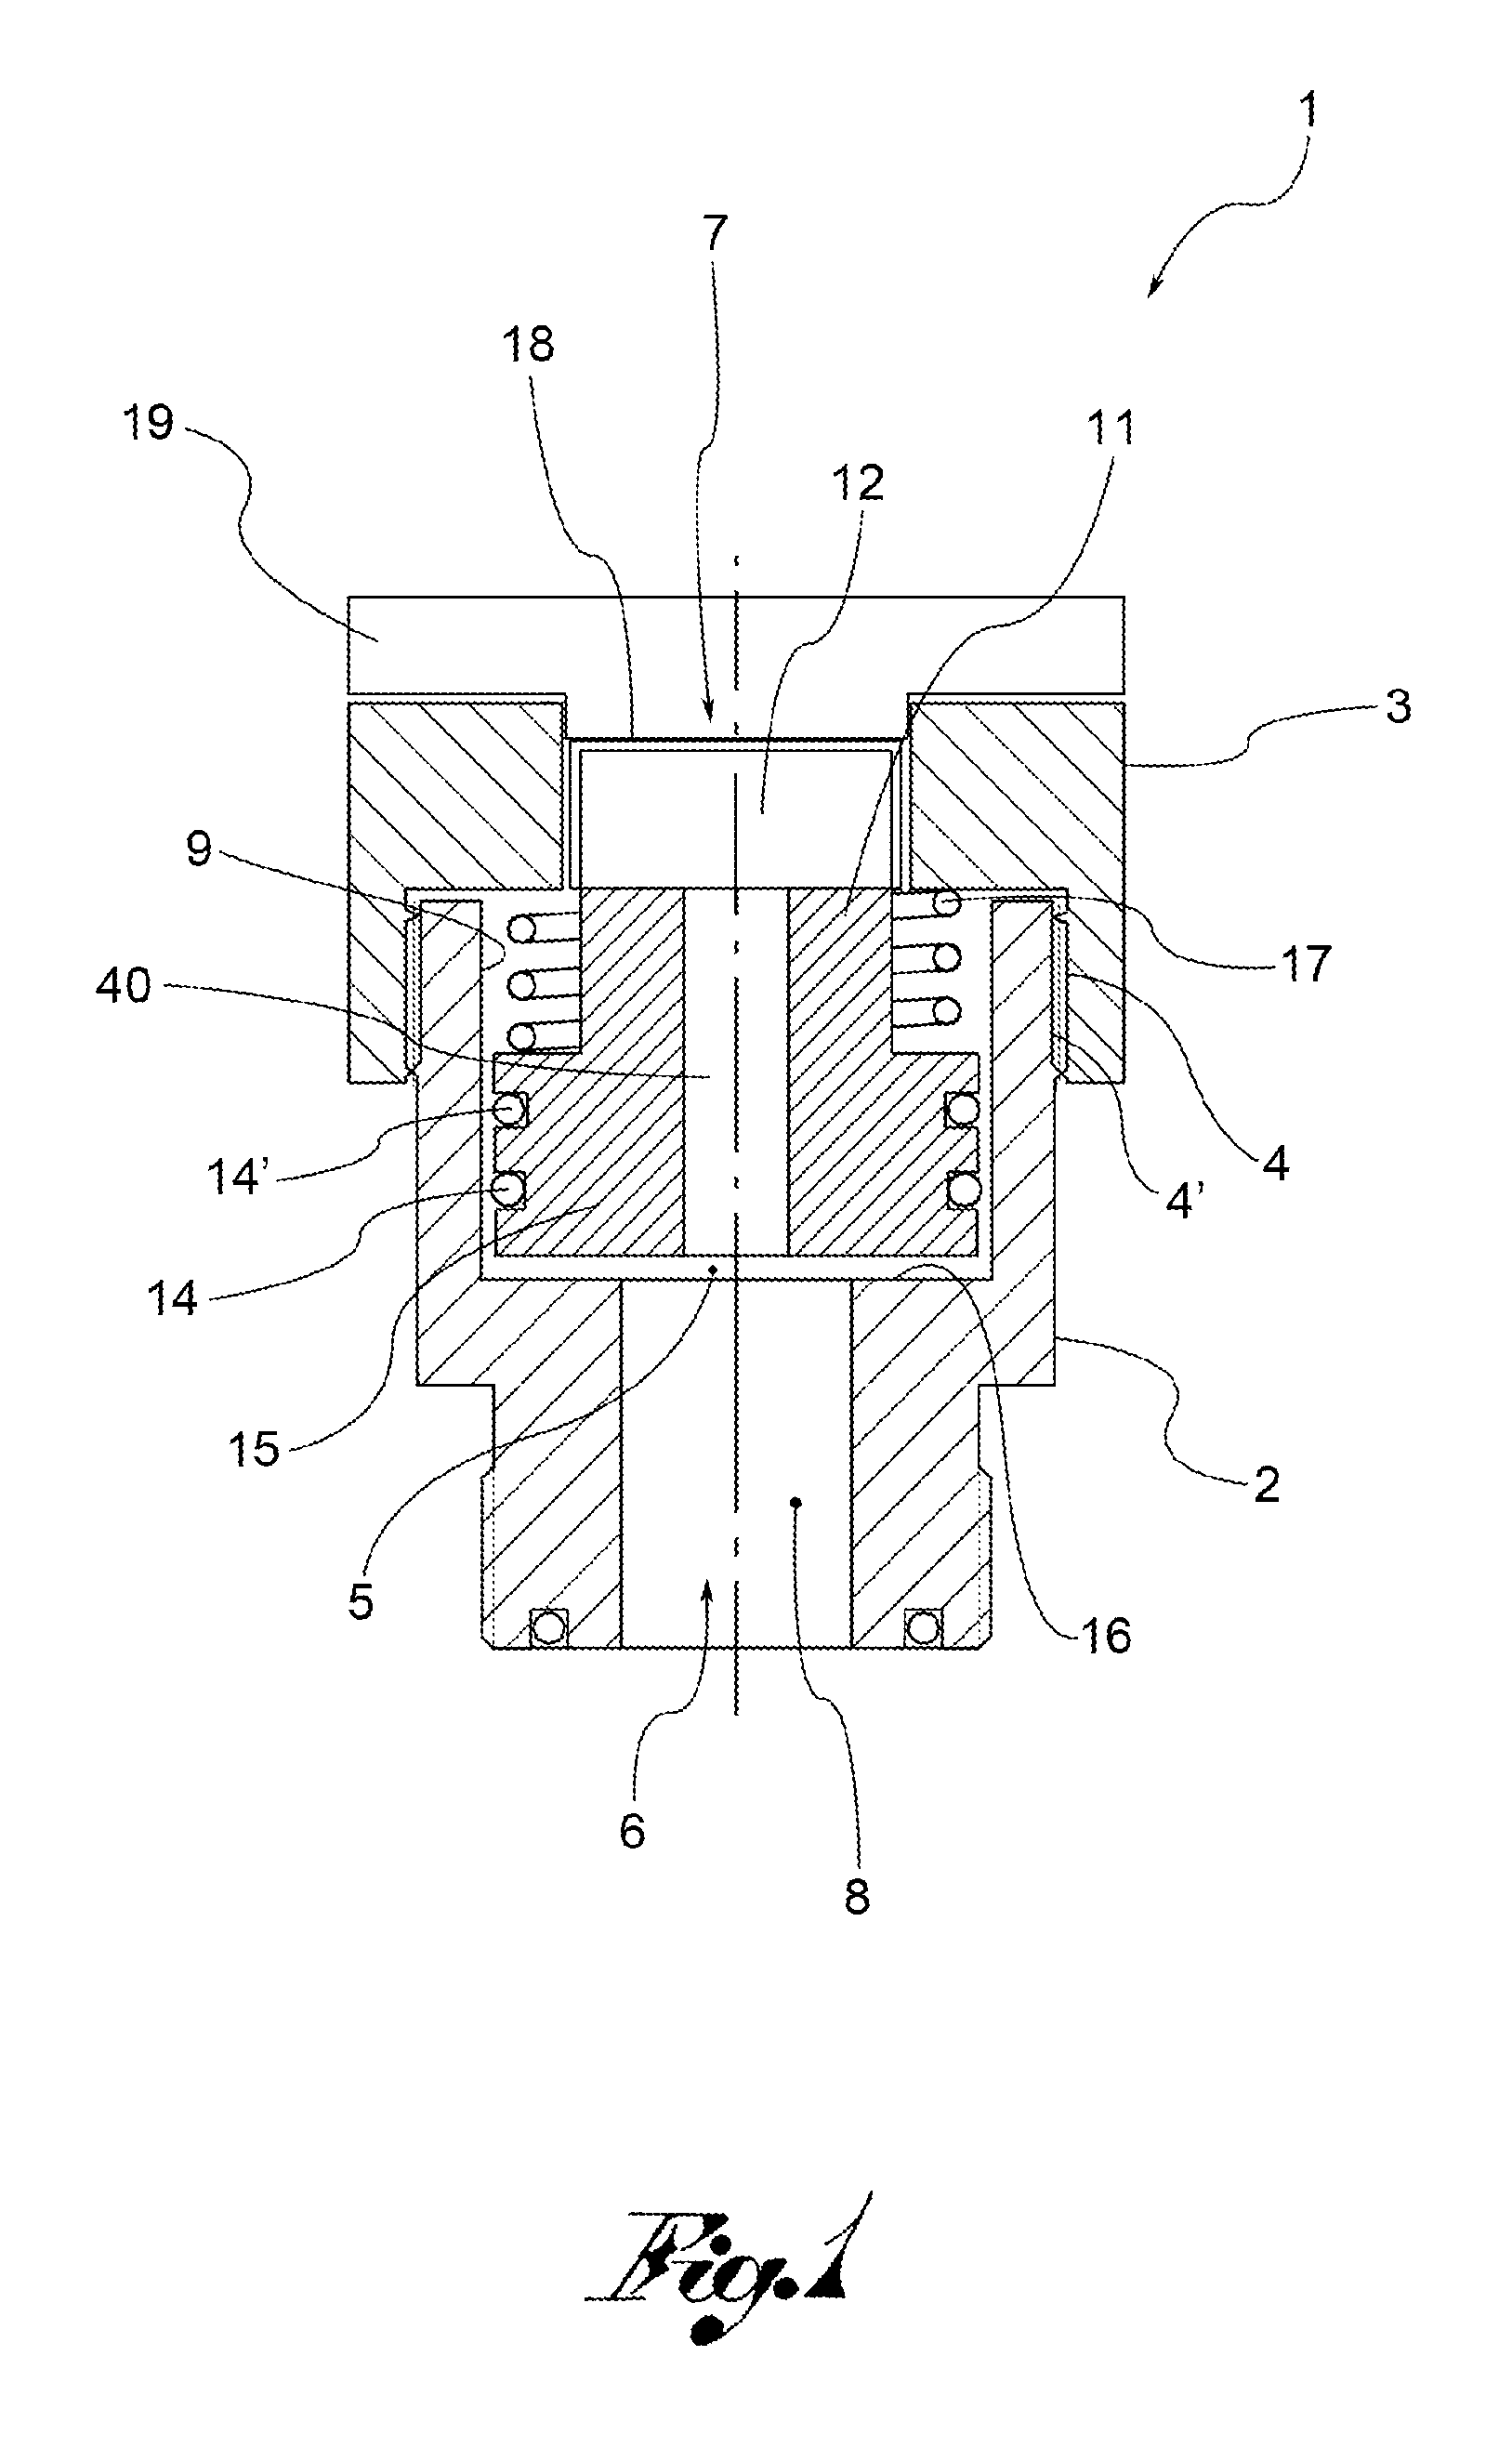 Integrated safety device for self-propulsion gas systems